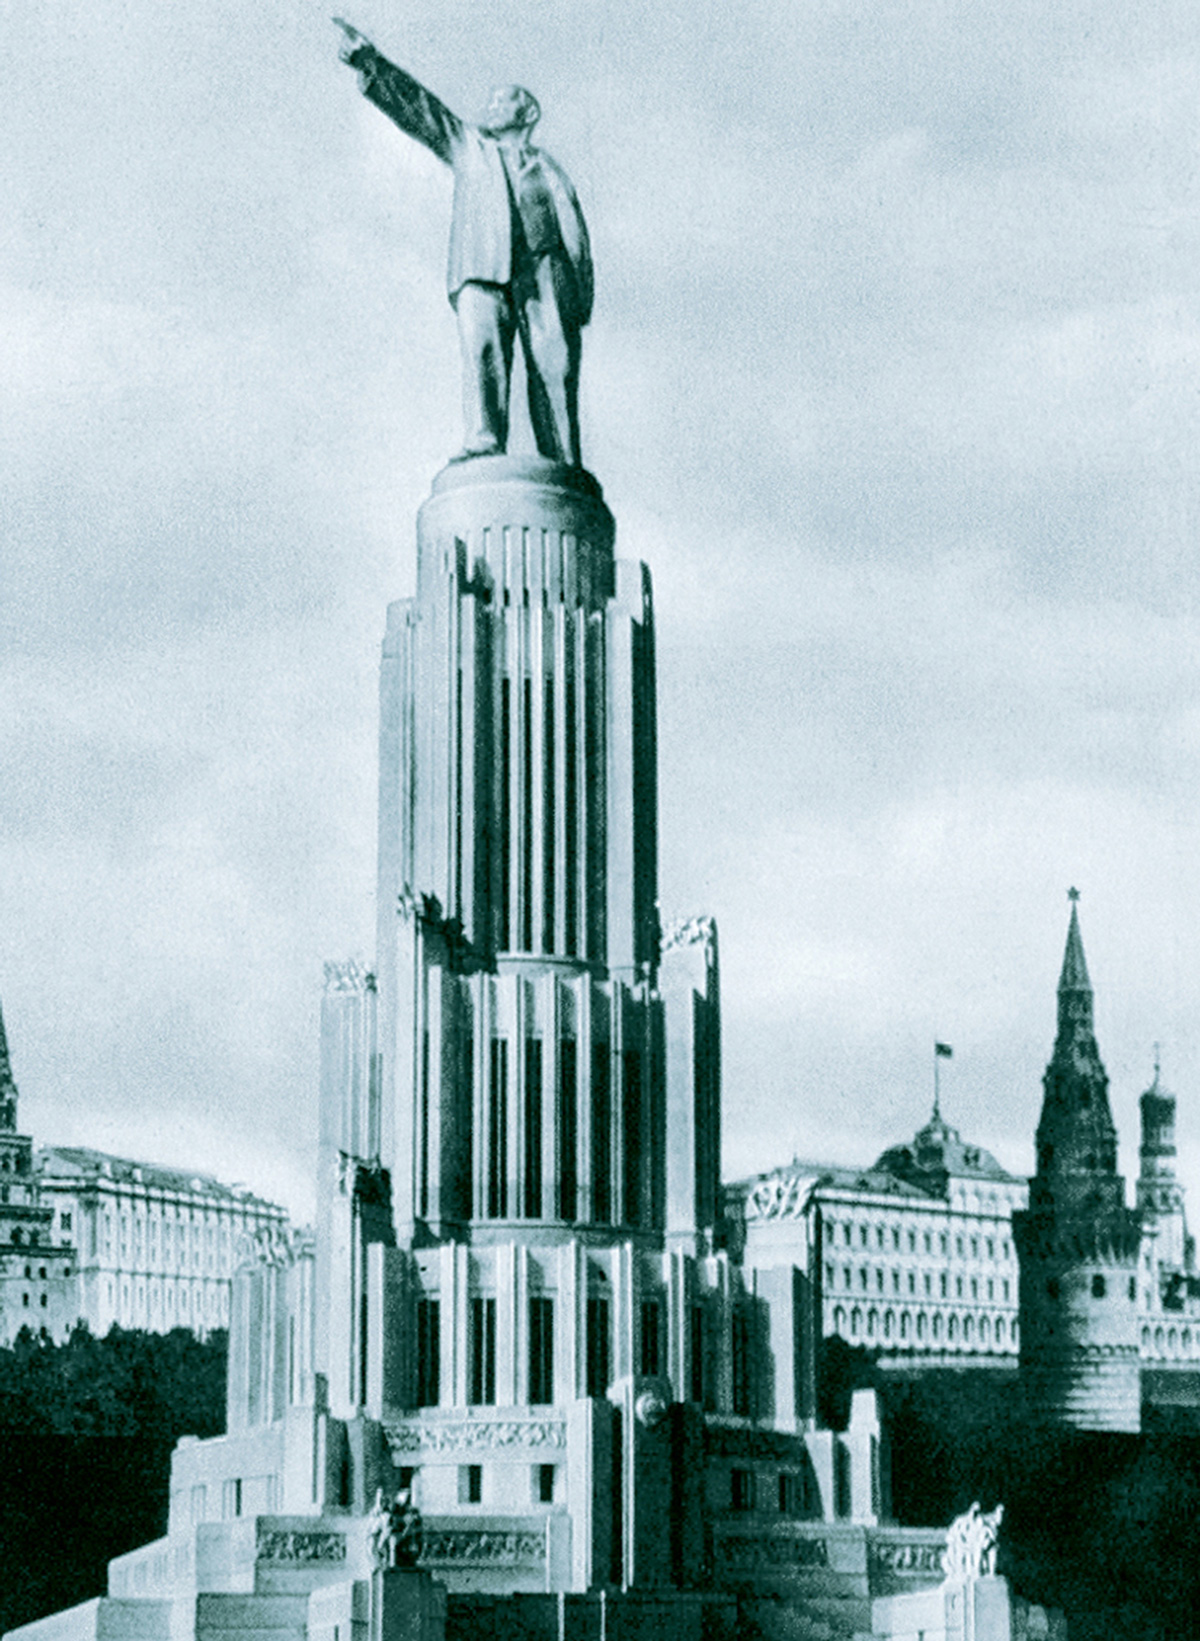 The Stalinist dream-tower. Artist’s impression of Boris Iofan’s
winning proposal for the Palace of the Soviets. Though some
preliminary construction began in the late 1930s, the Palace
was never built. Courtesy David King Collection.